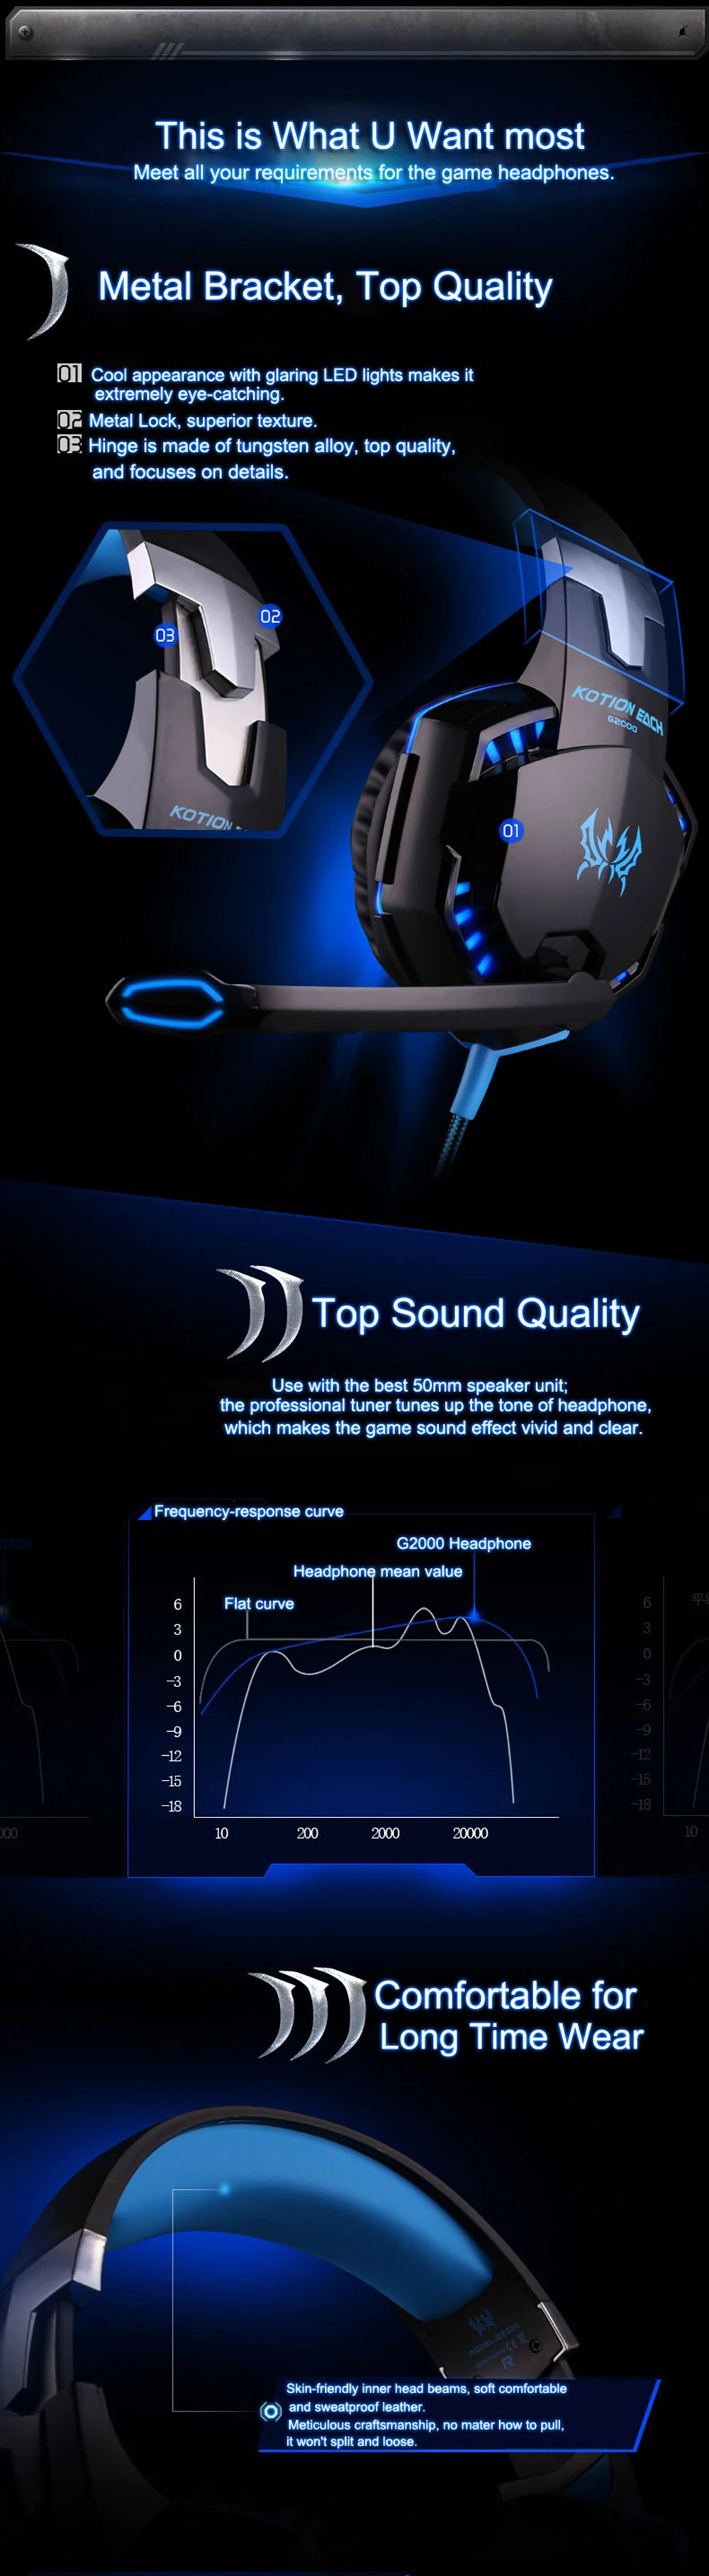 Kotion EACH Gaming Headset Best Casque Deep Bass Stereo Headphones with Mic LED Light for PS4 Xbox One PC Gamer